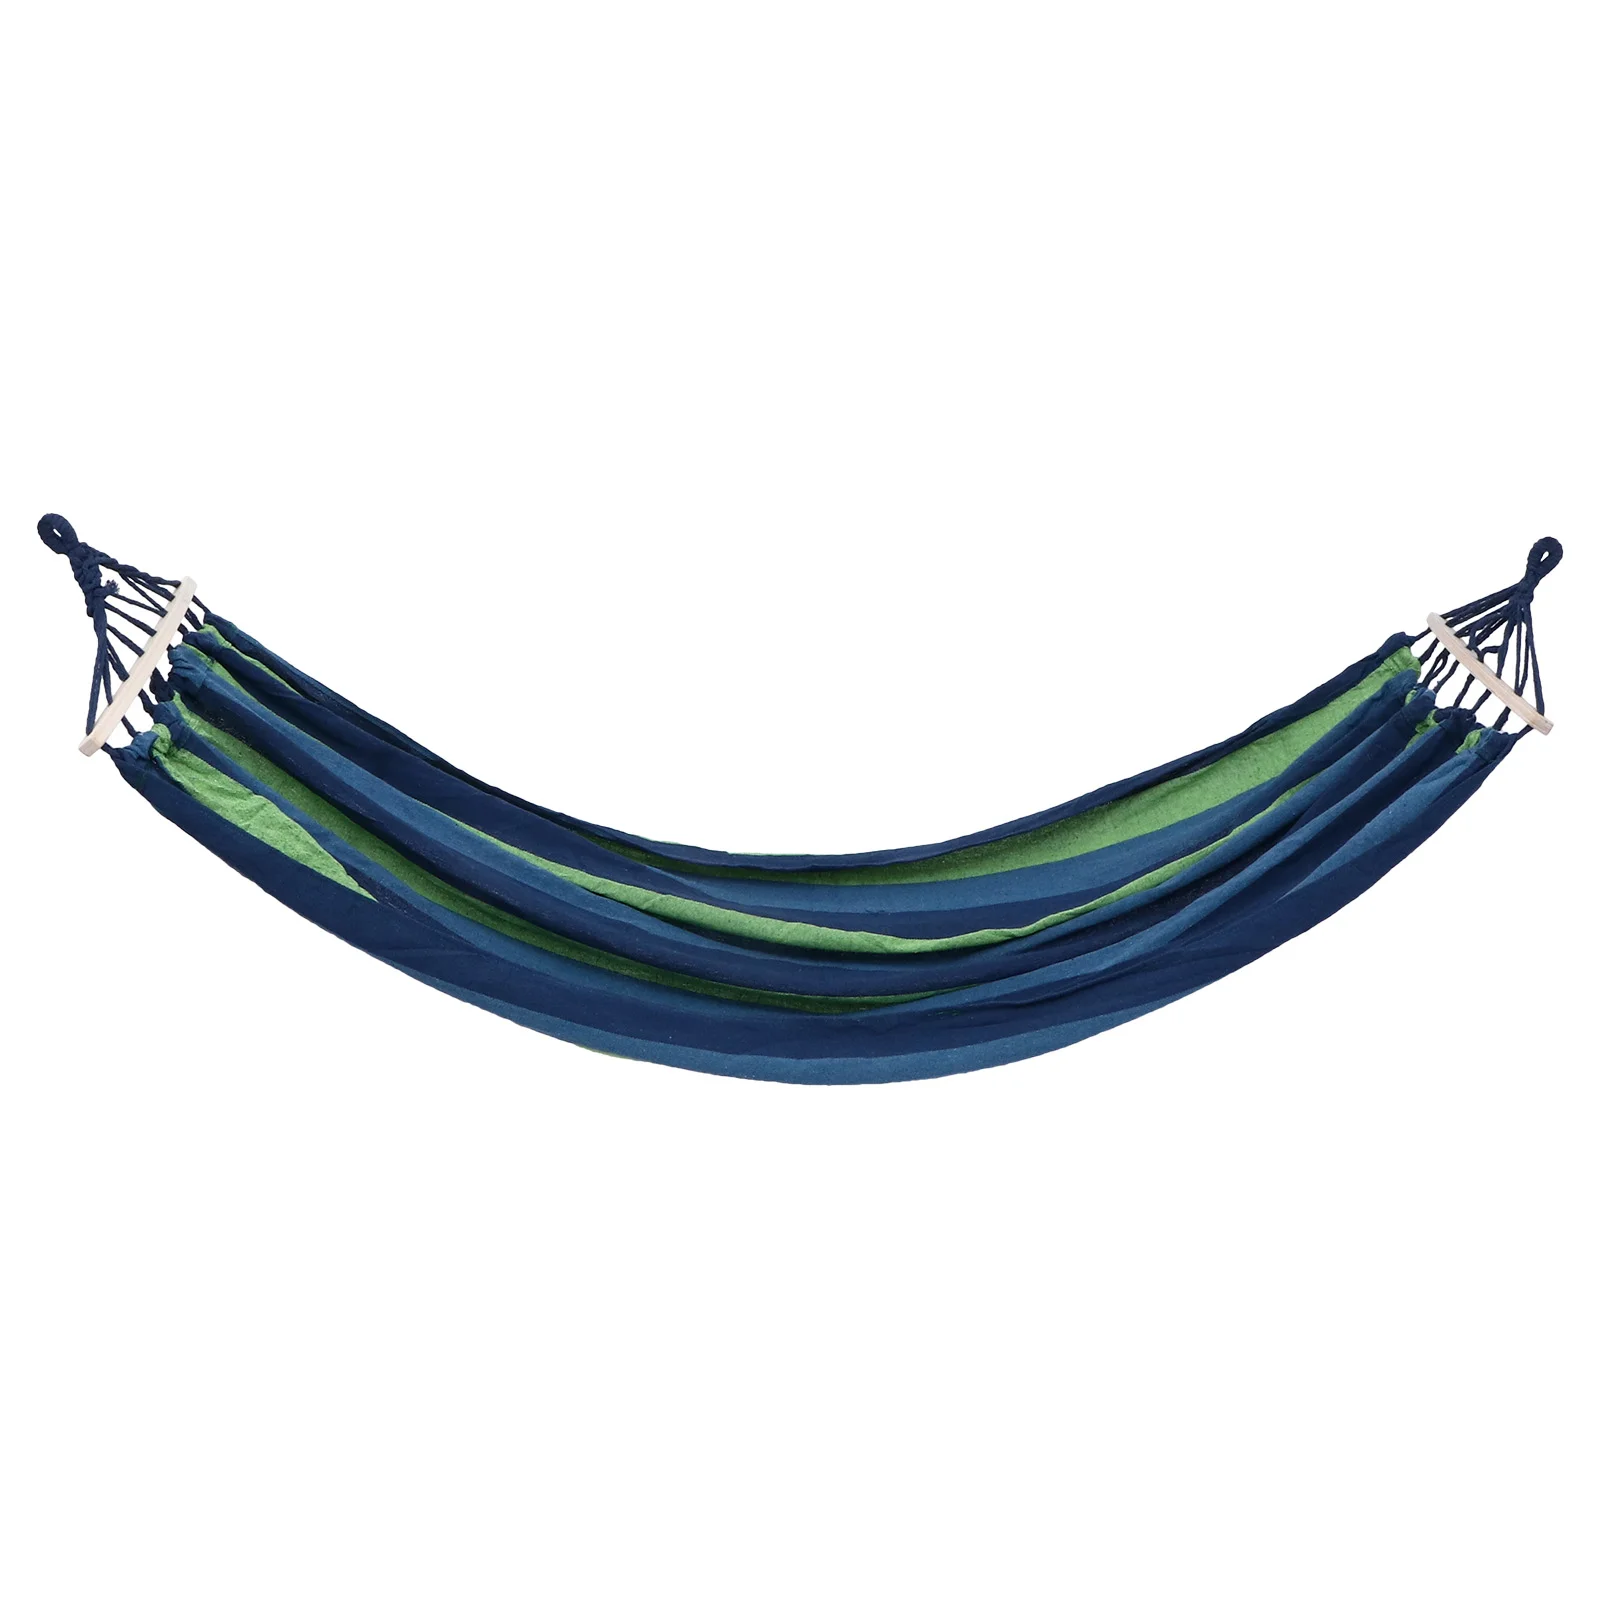 

Hammock Swing Outdoor Canvas Hanging Rope Nylon Portable Tree Travel Chair Striped Camping Backpacking Hammocks Garden swings